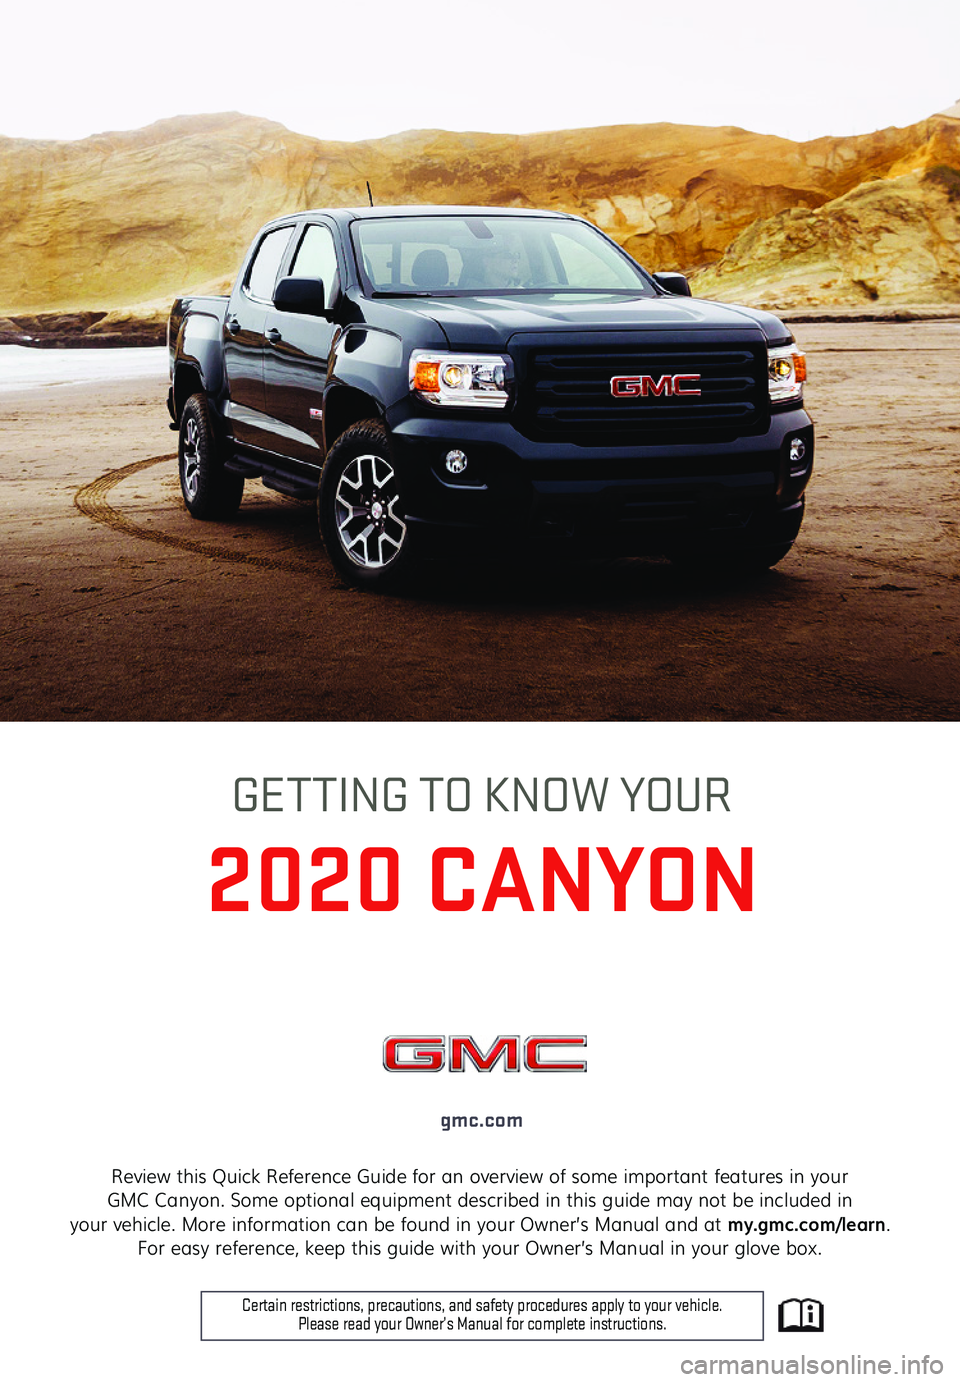 GMC CANYON 2020  Get To Know Guide 